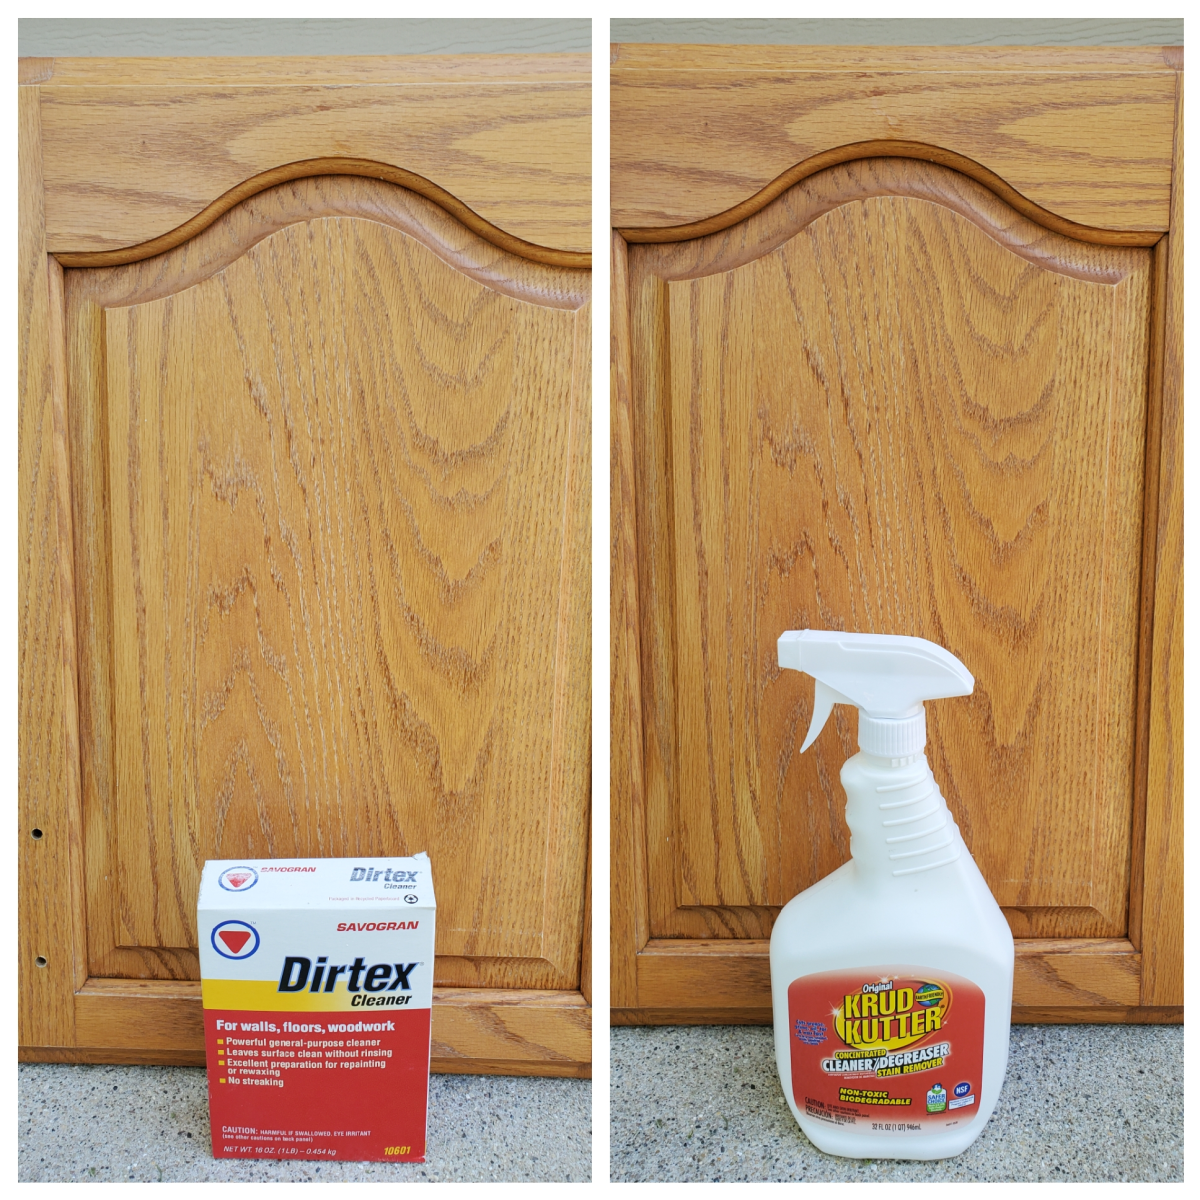 Which cleaner is best for your cabinets?